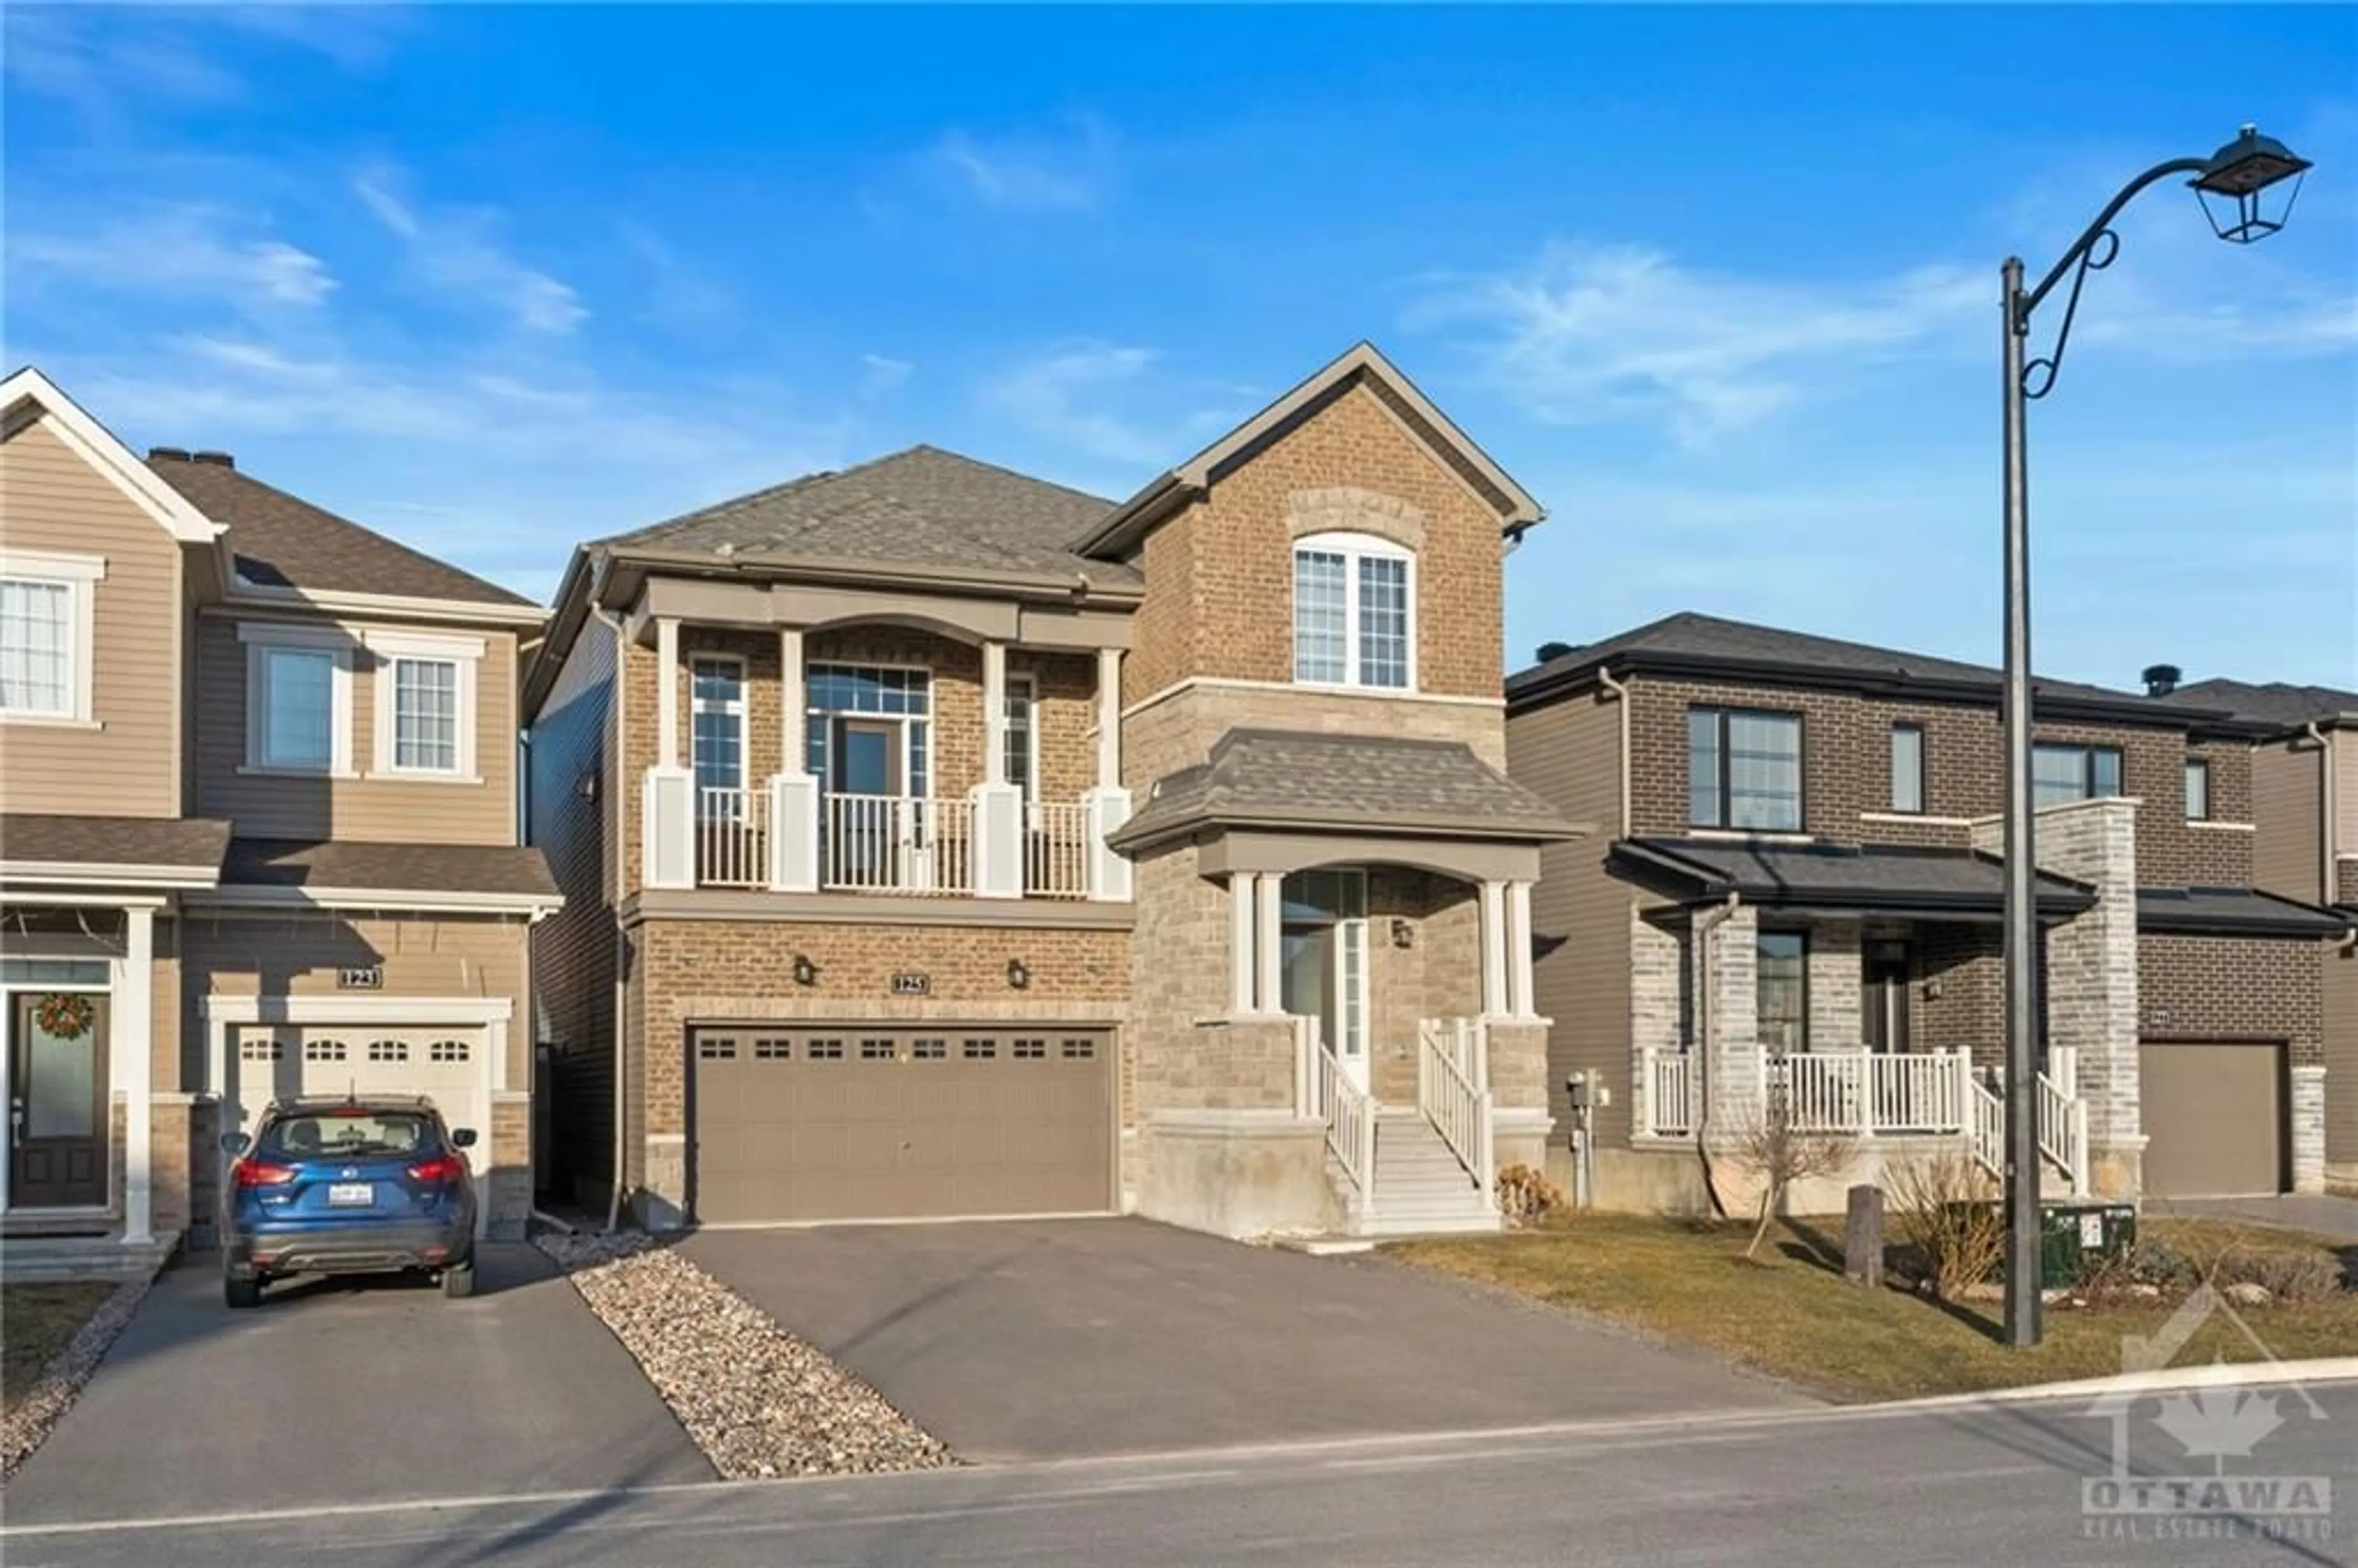 Frontside or backside of a home for 125 PALOMA Cir, Ottawa Ontario K2J 6R9